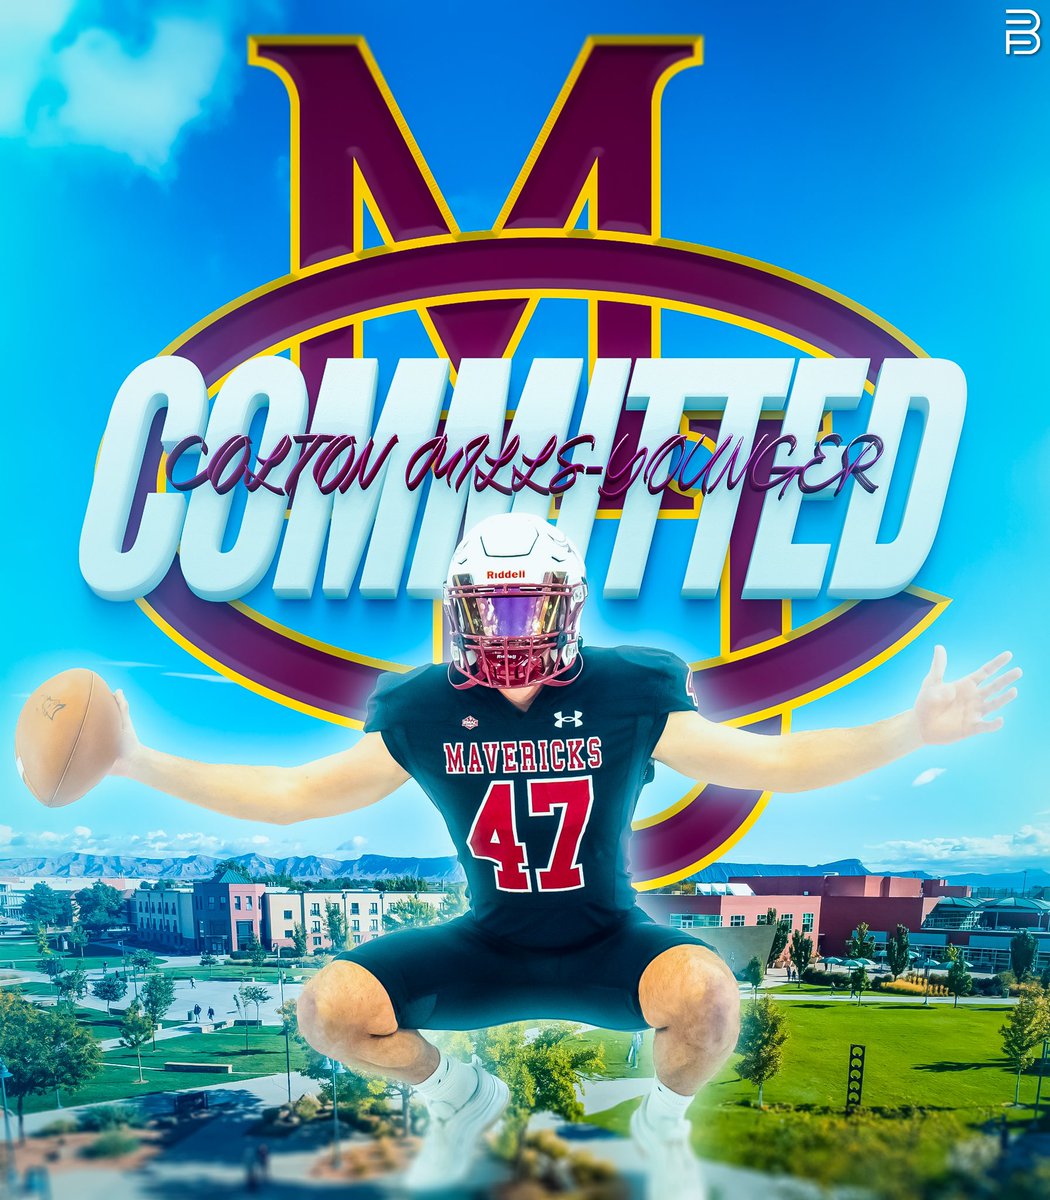 I’m truly excited and blessed to announce my commitment to Colorado Mesa University! I want to thank all my friends, family and coaches who have helped me and supported me through this process! I’m excited to see what this next chapter brings! MAVUP‼️